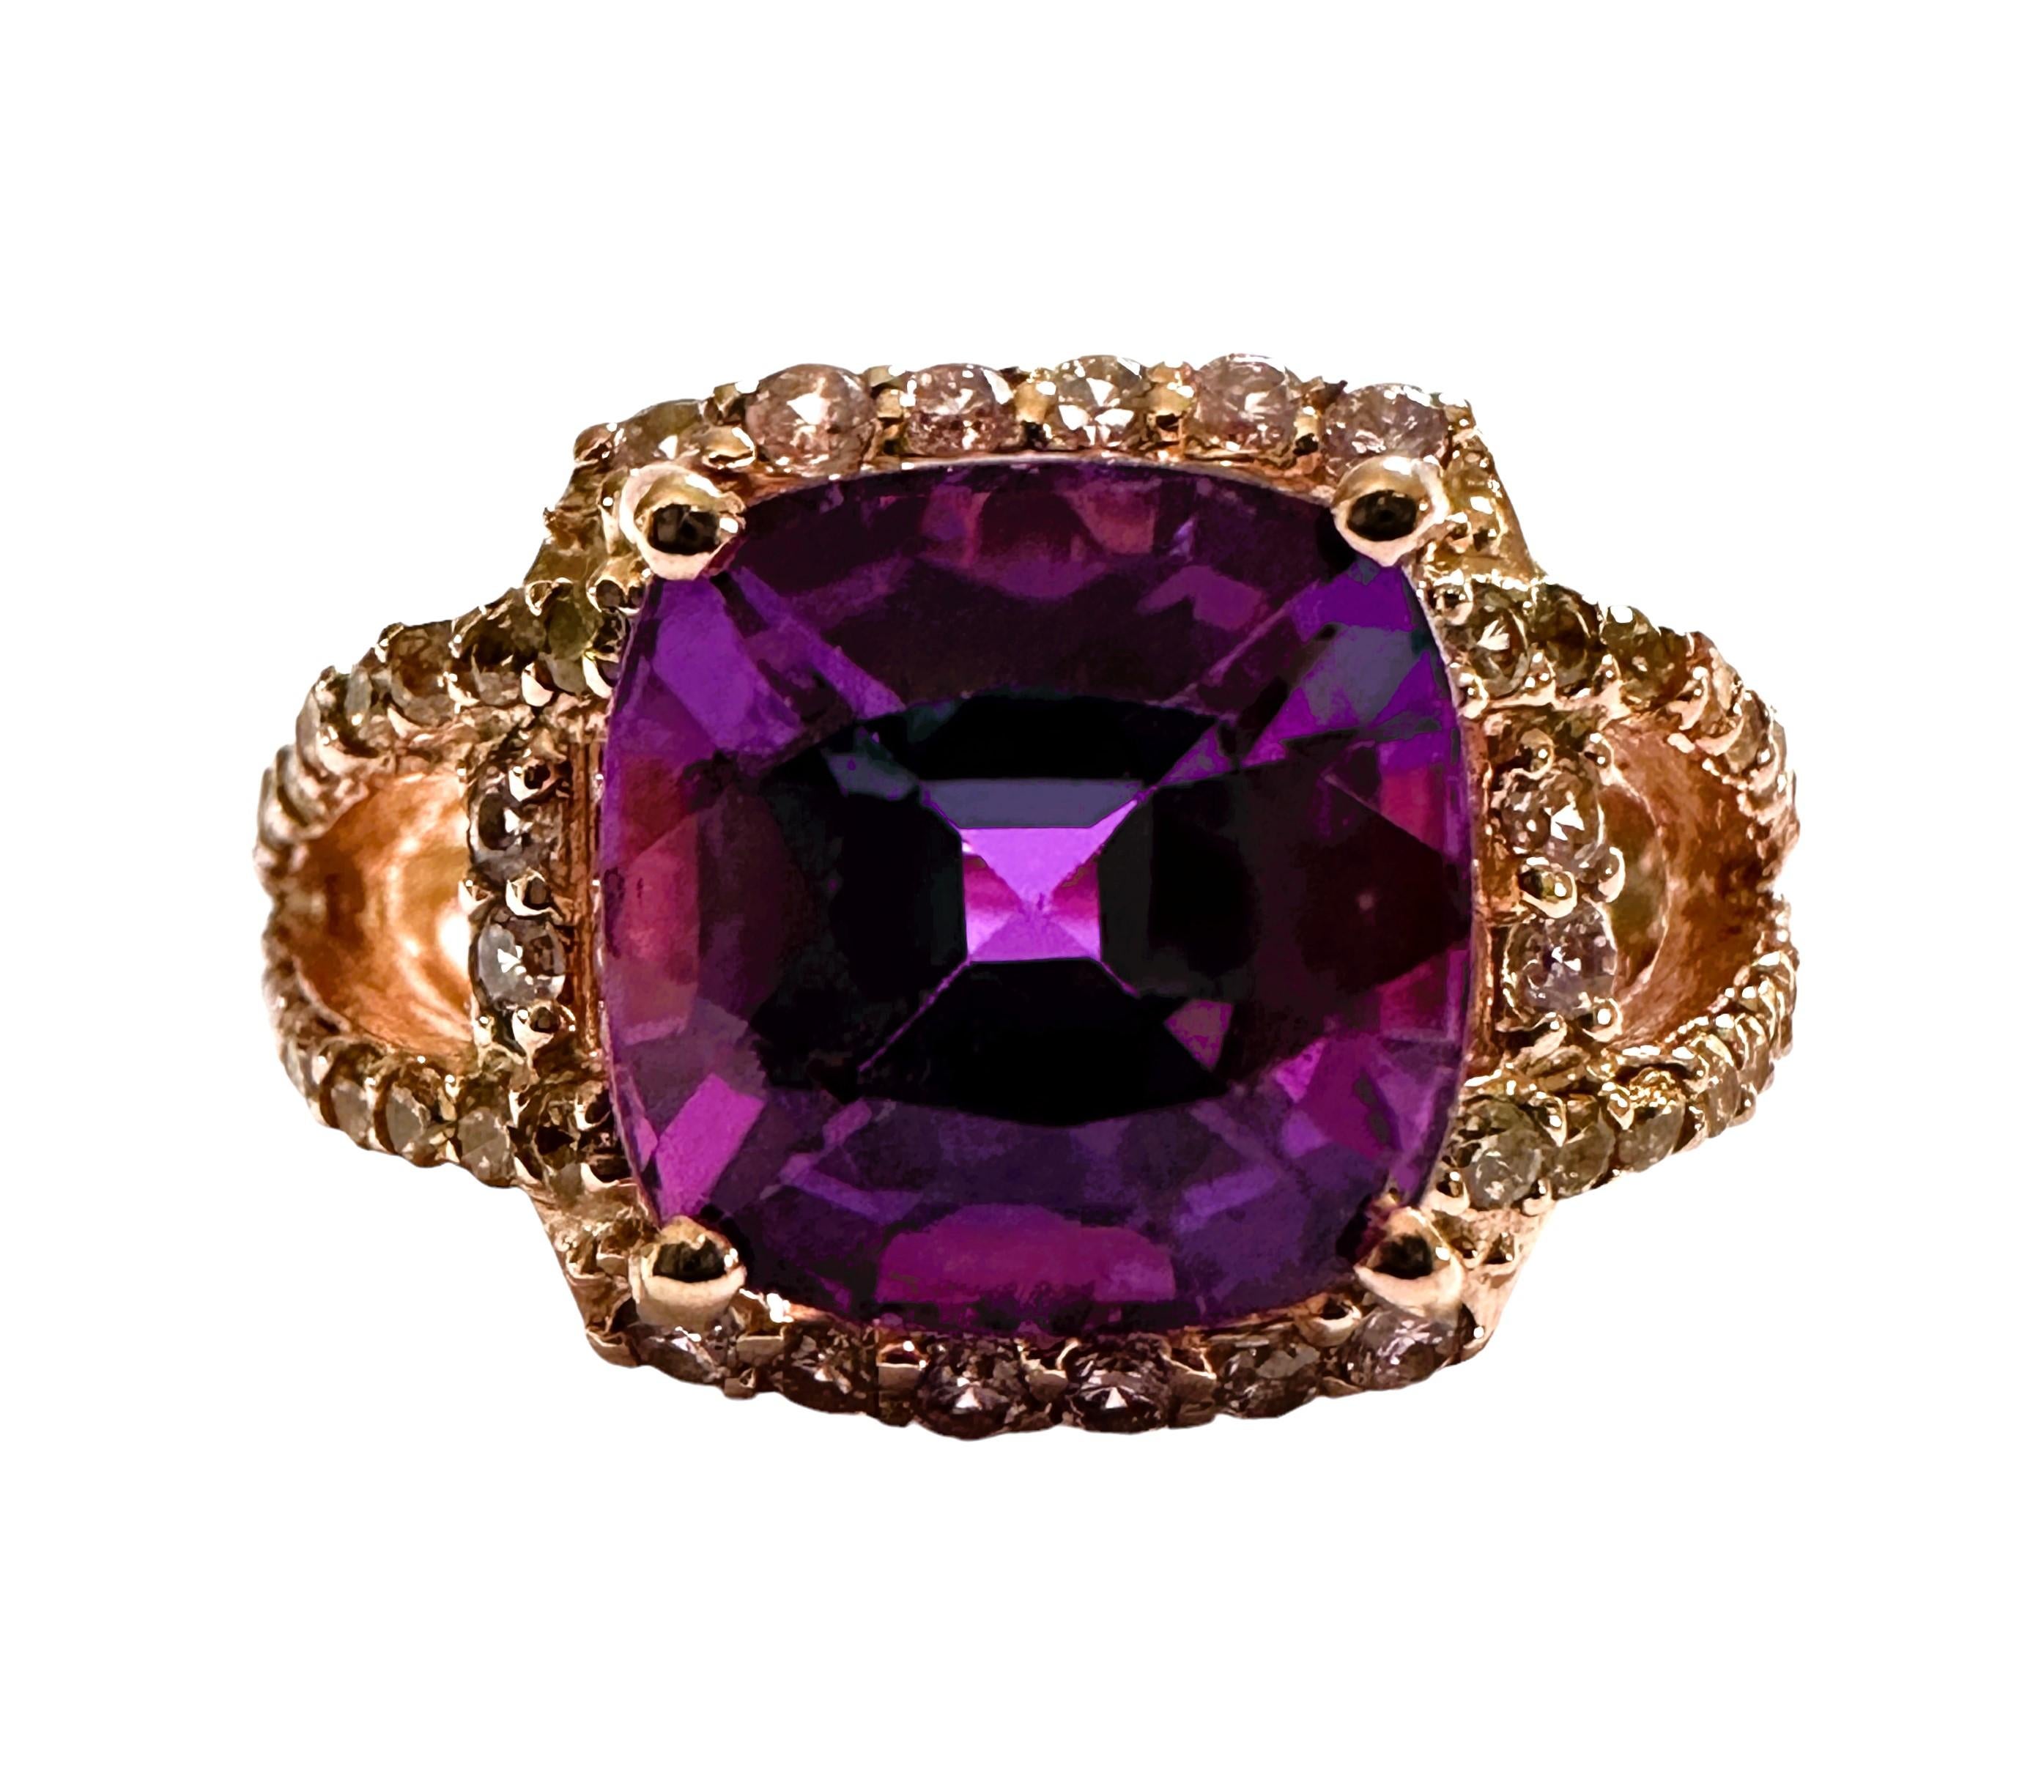 This is just a beautiful gemstone. This beautiful stone has pinks, blues and purples in it.  It's just spectacular.  The ring is a size 6.5.  It was mined in Africa and is just exquisite.   A very high quality stone. It is a cushion cut stone and is